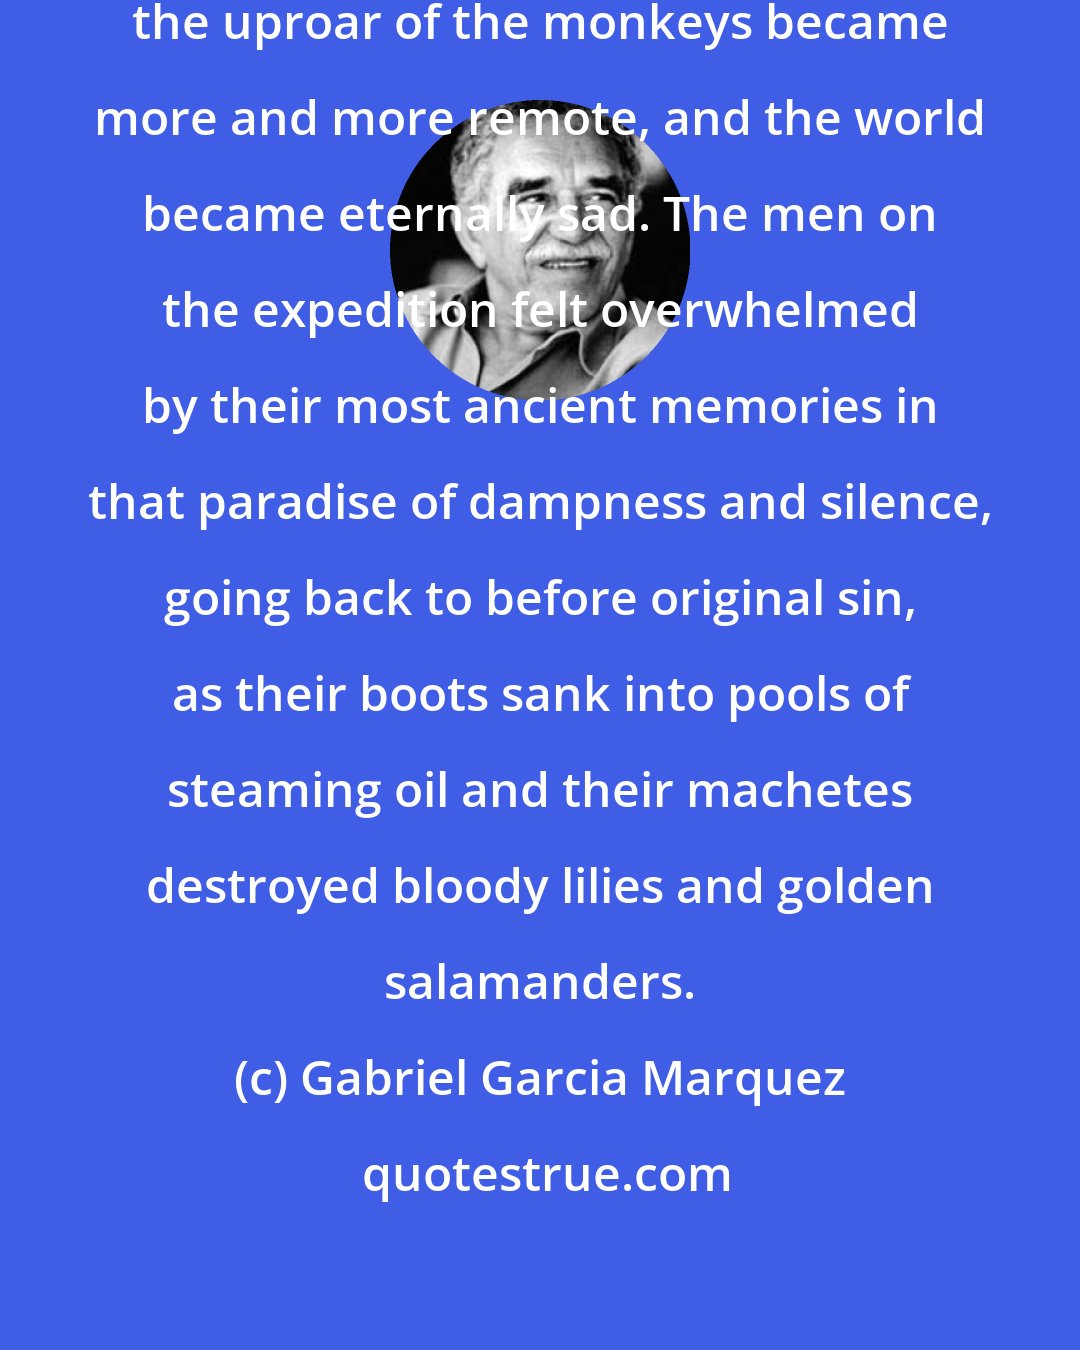 Gabriel Garcia Marquez: ...and the cries of the birds and the uproar of the monkeys became more and more remote, and the world became eternally sad. The men on the expedition felt overwhelmed by their most ancient memories in that paradise of dampness and silence, going back to before original sin, as their boots sank into pools of steaming oil and their machetes destroyed bloody lilies and golden salamanders.